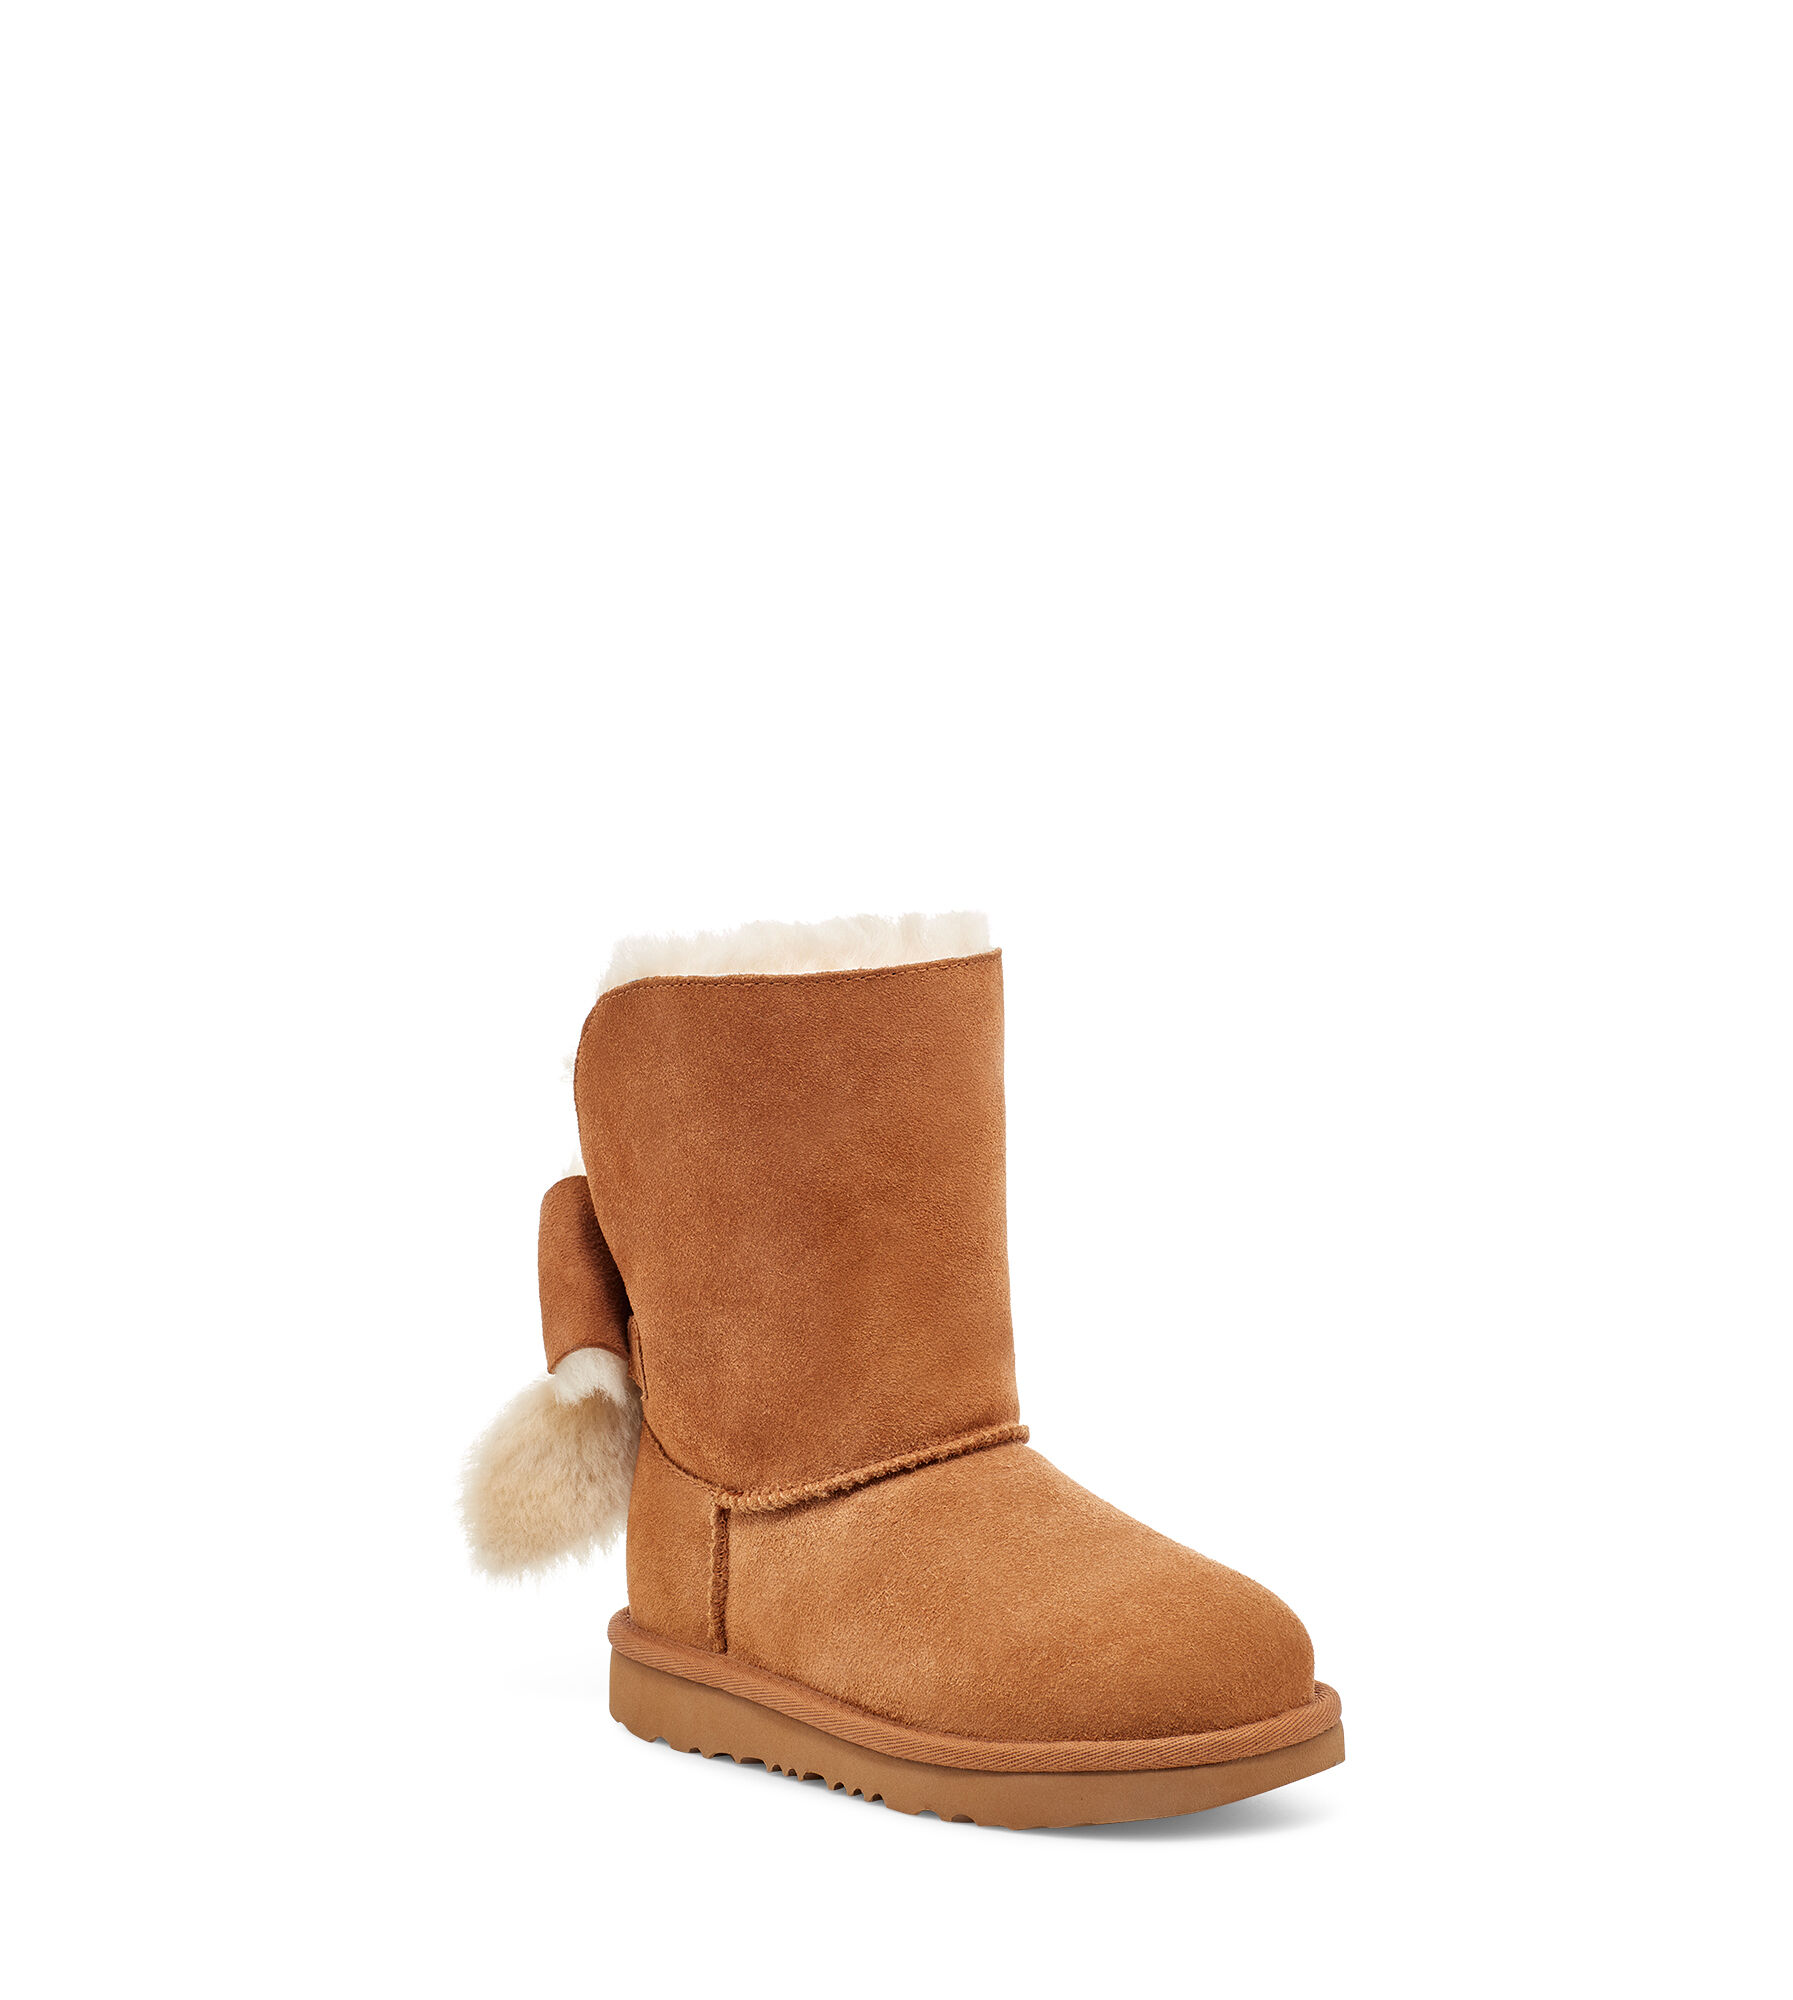 ugg boots for toddlers